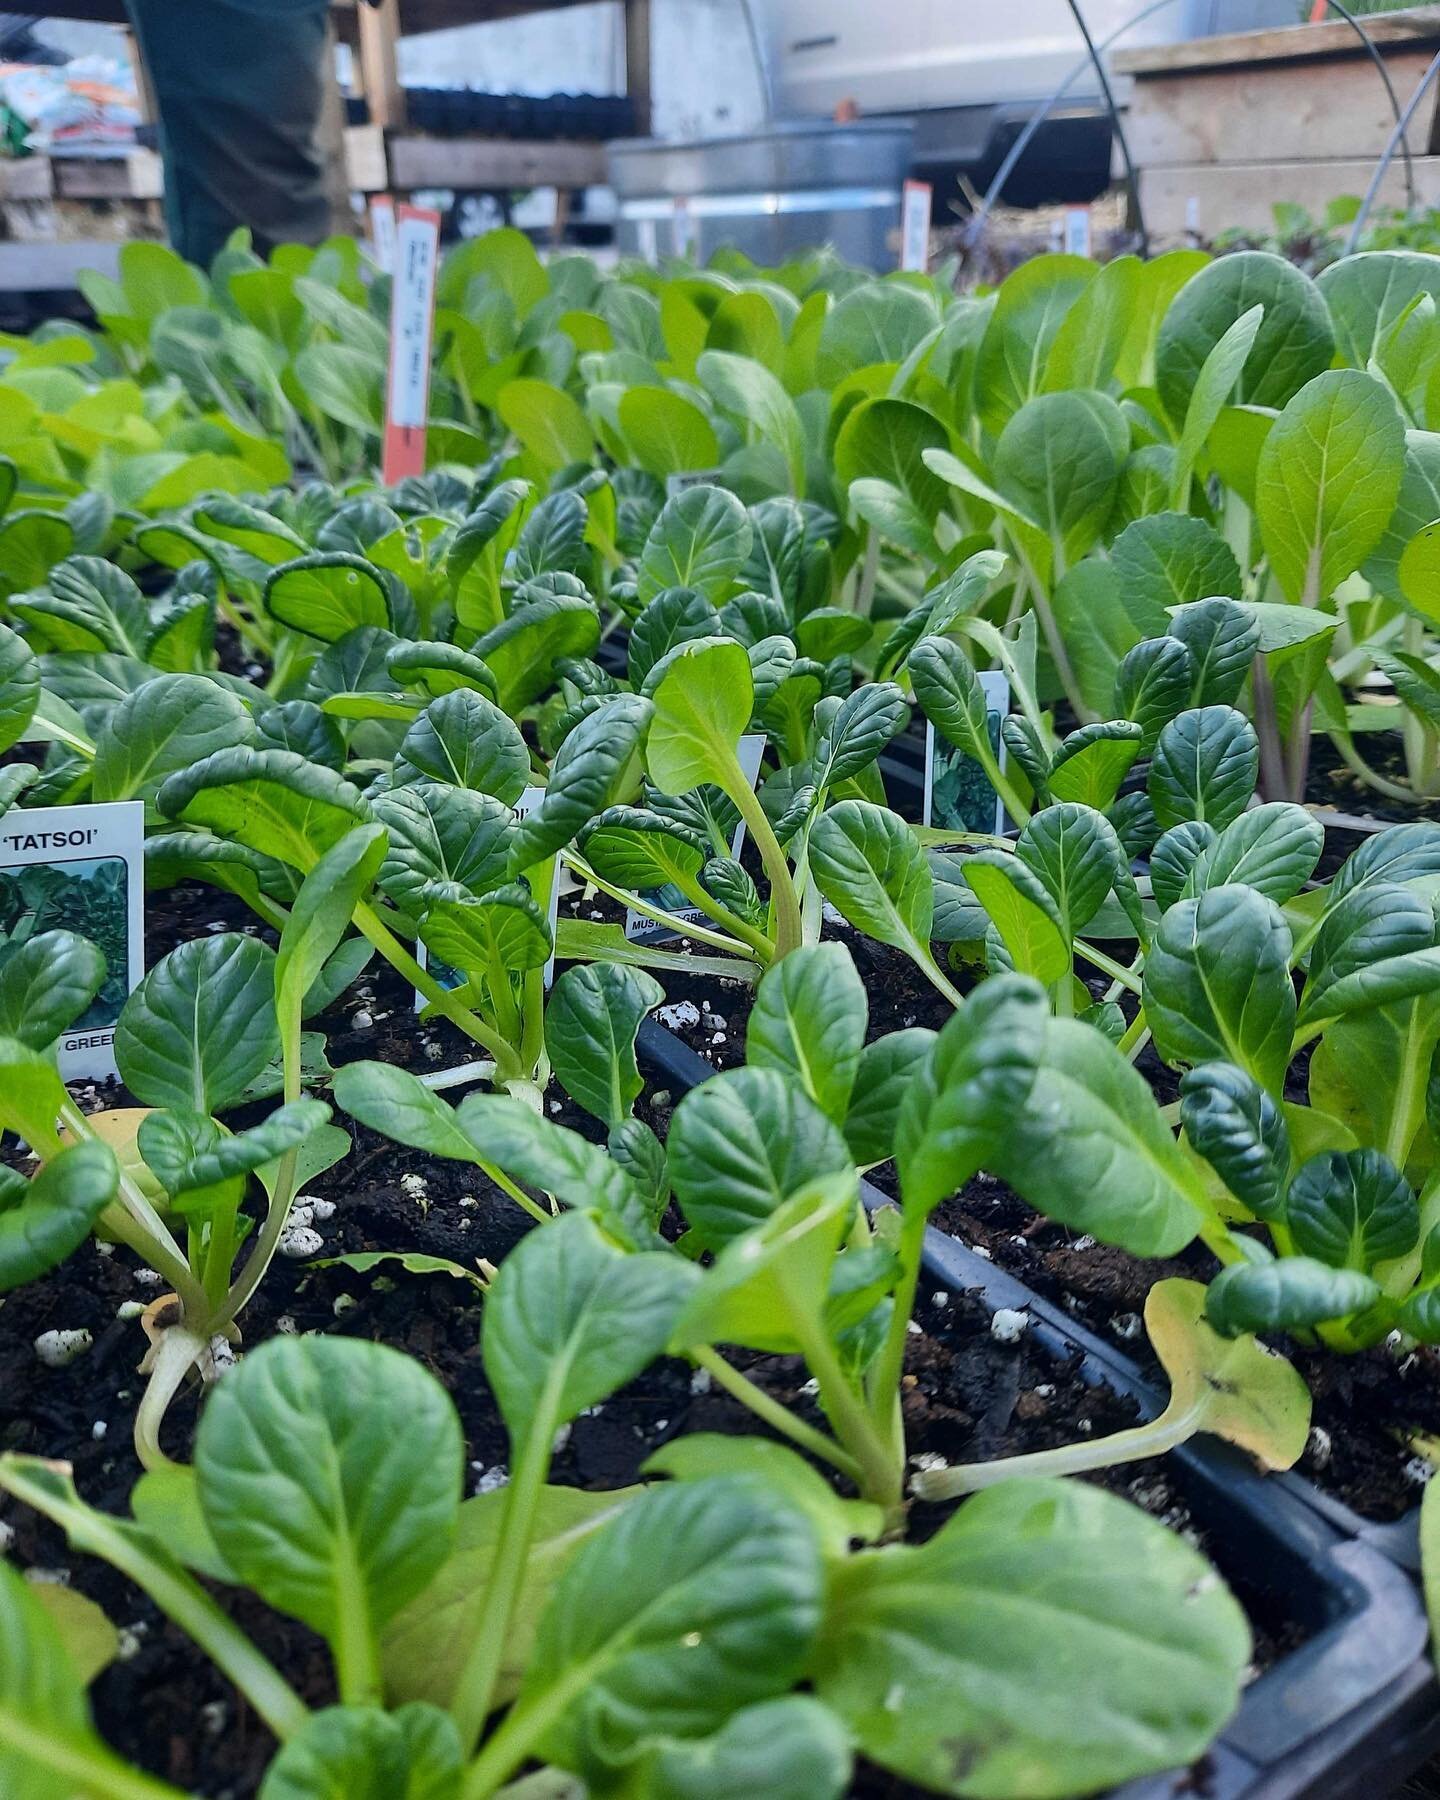 Succulent lettuces, dazzling kales, beautiful bok choy 🤗 We&rsquo;ve got spring veggies on deck as we&rsquo;re busy waking up gardens this week! We are topping off beds with soil, working in organic amendments, and trying not to disturb hibernating 